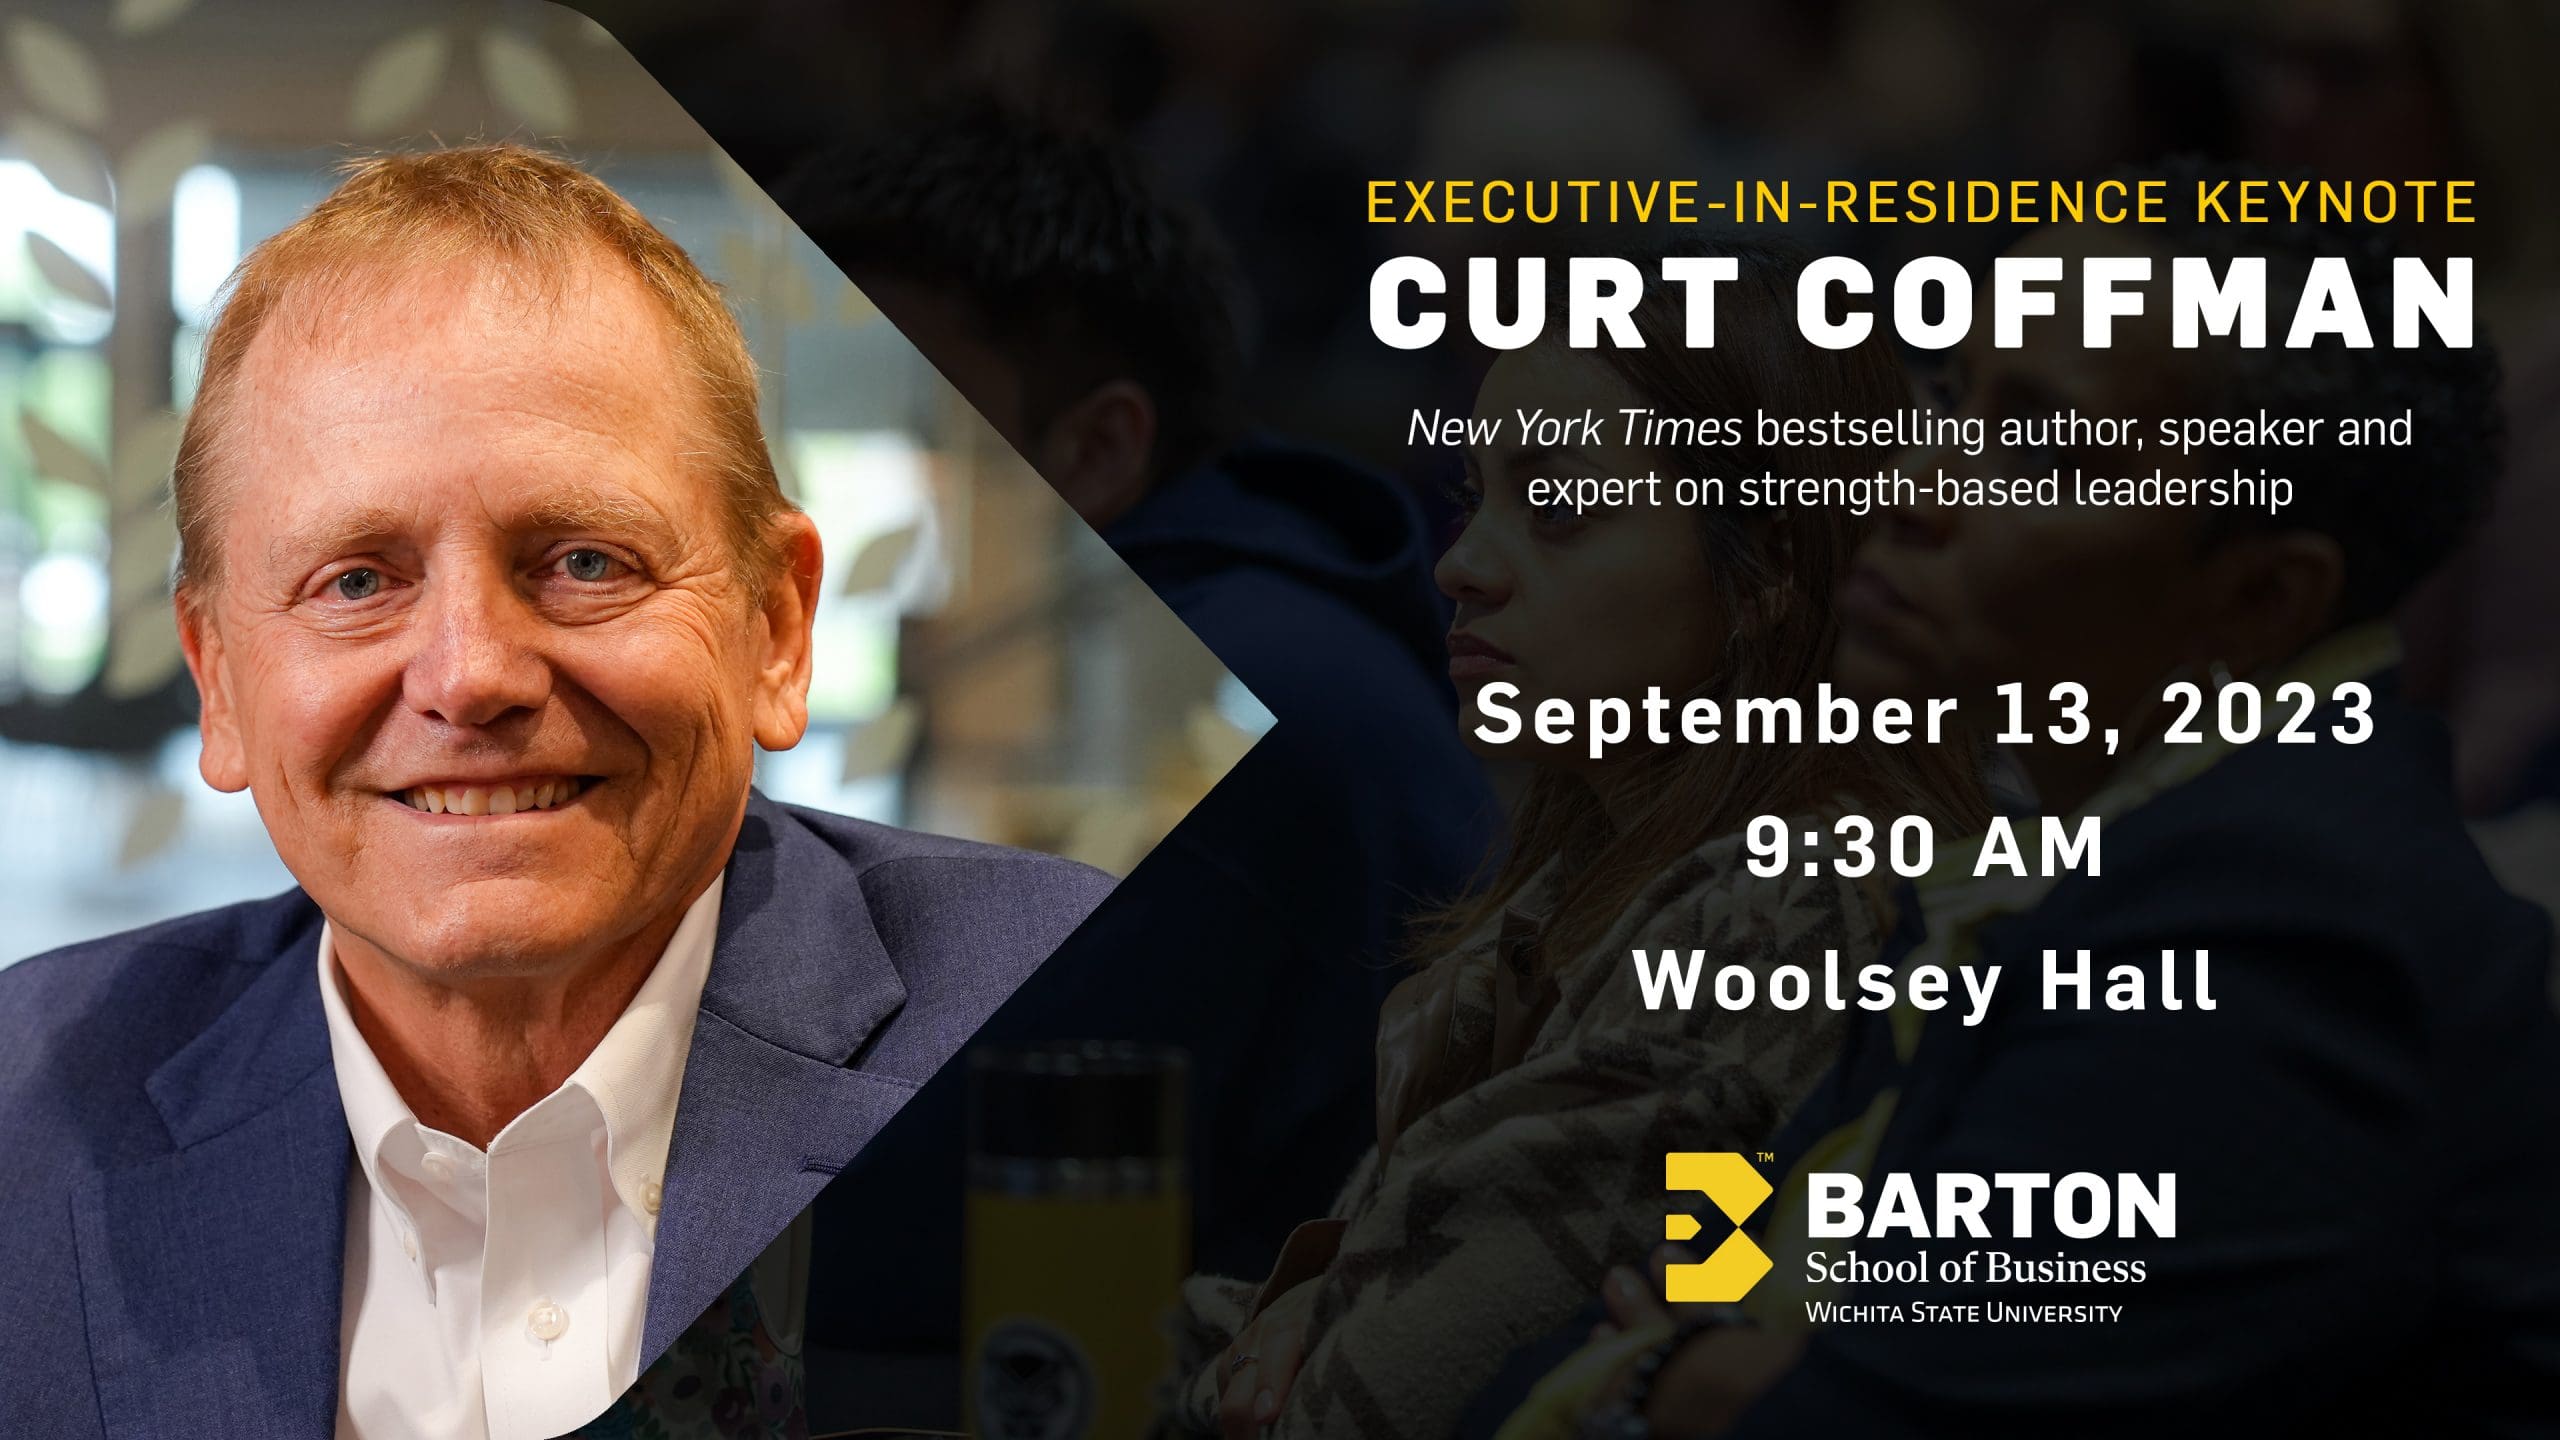 Executive in Residence Keynote - Curt Coffman. New York Times bestselling author, speaker and expert on strength-based leadership. September 13, 2023 at 9:30 AM in Woolsey Hall.